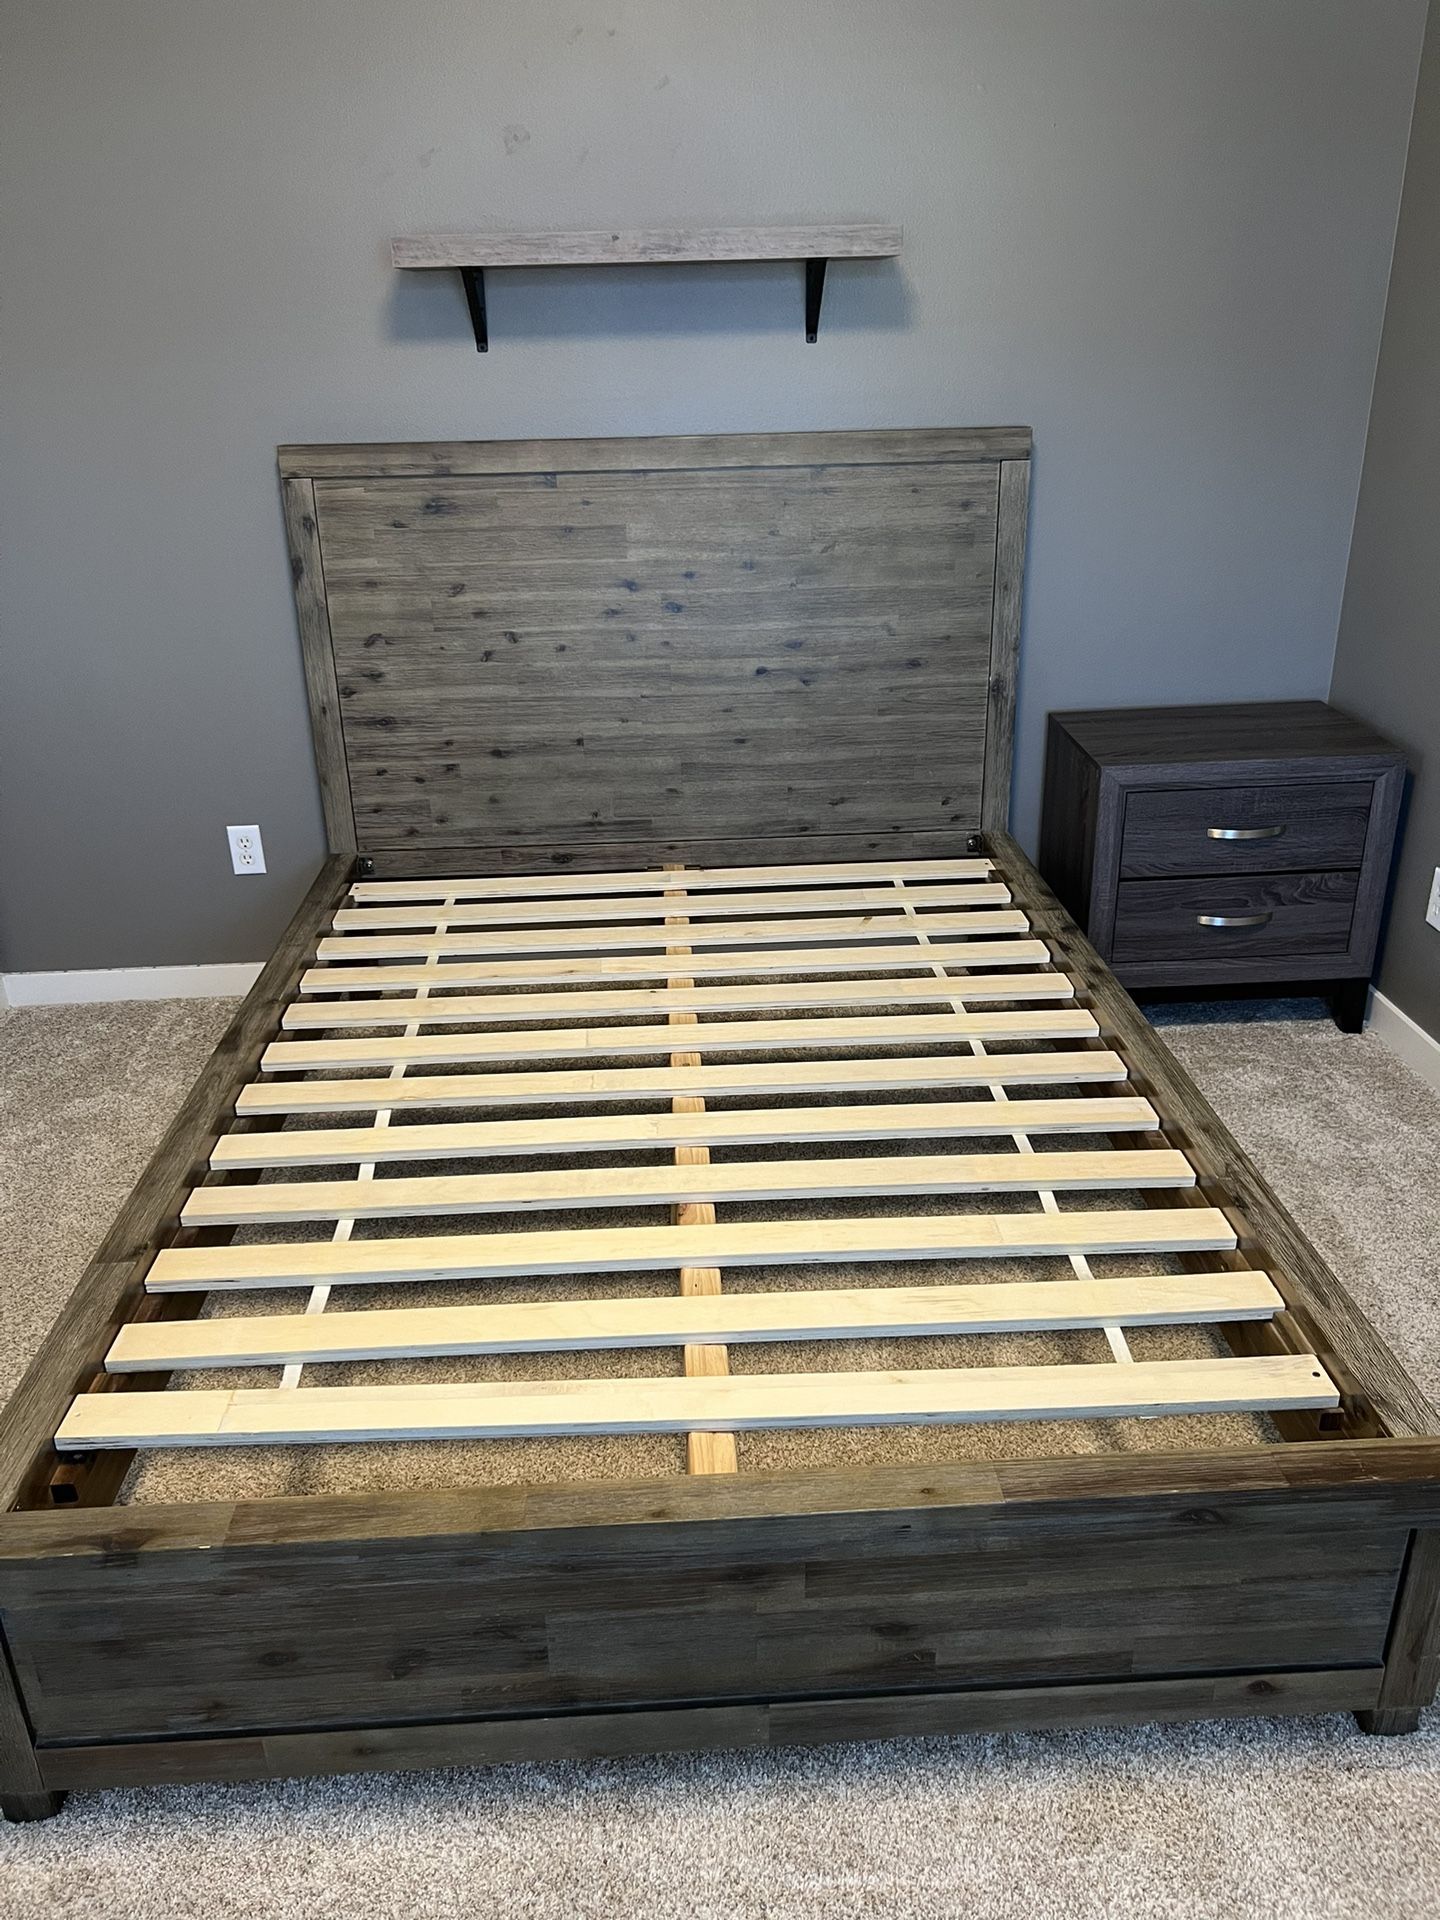 Full Bed frame and nightstand. Pending Pickup